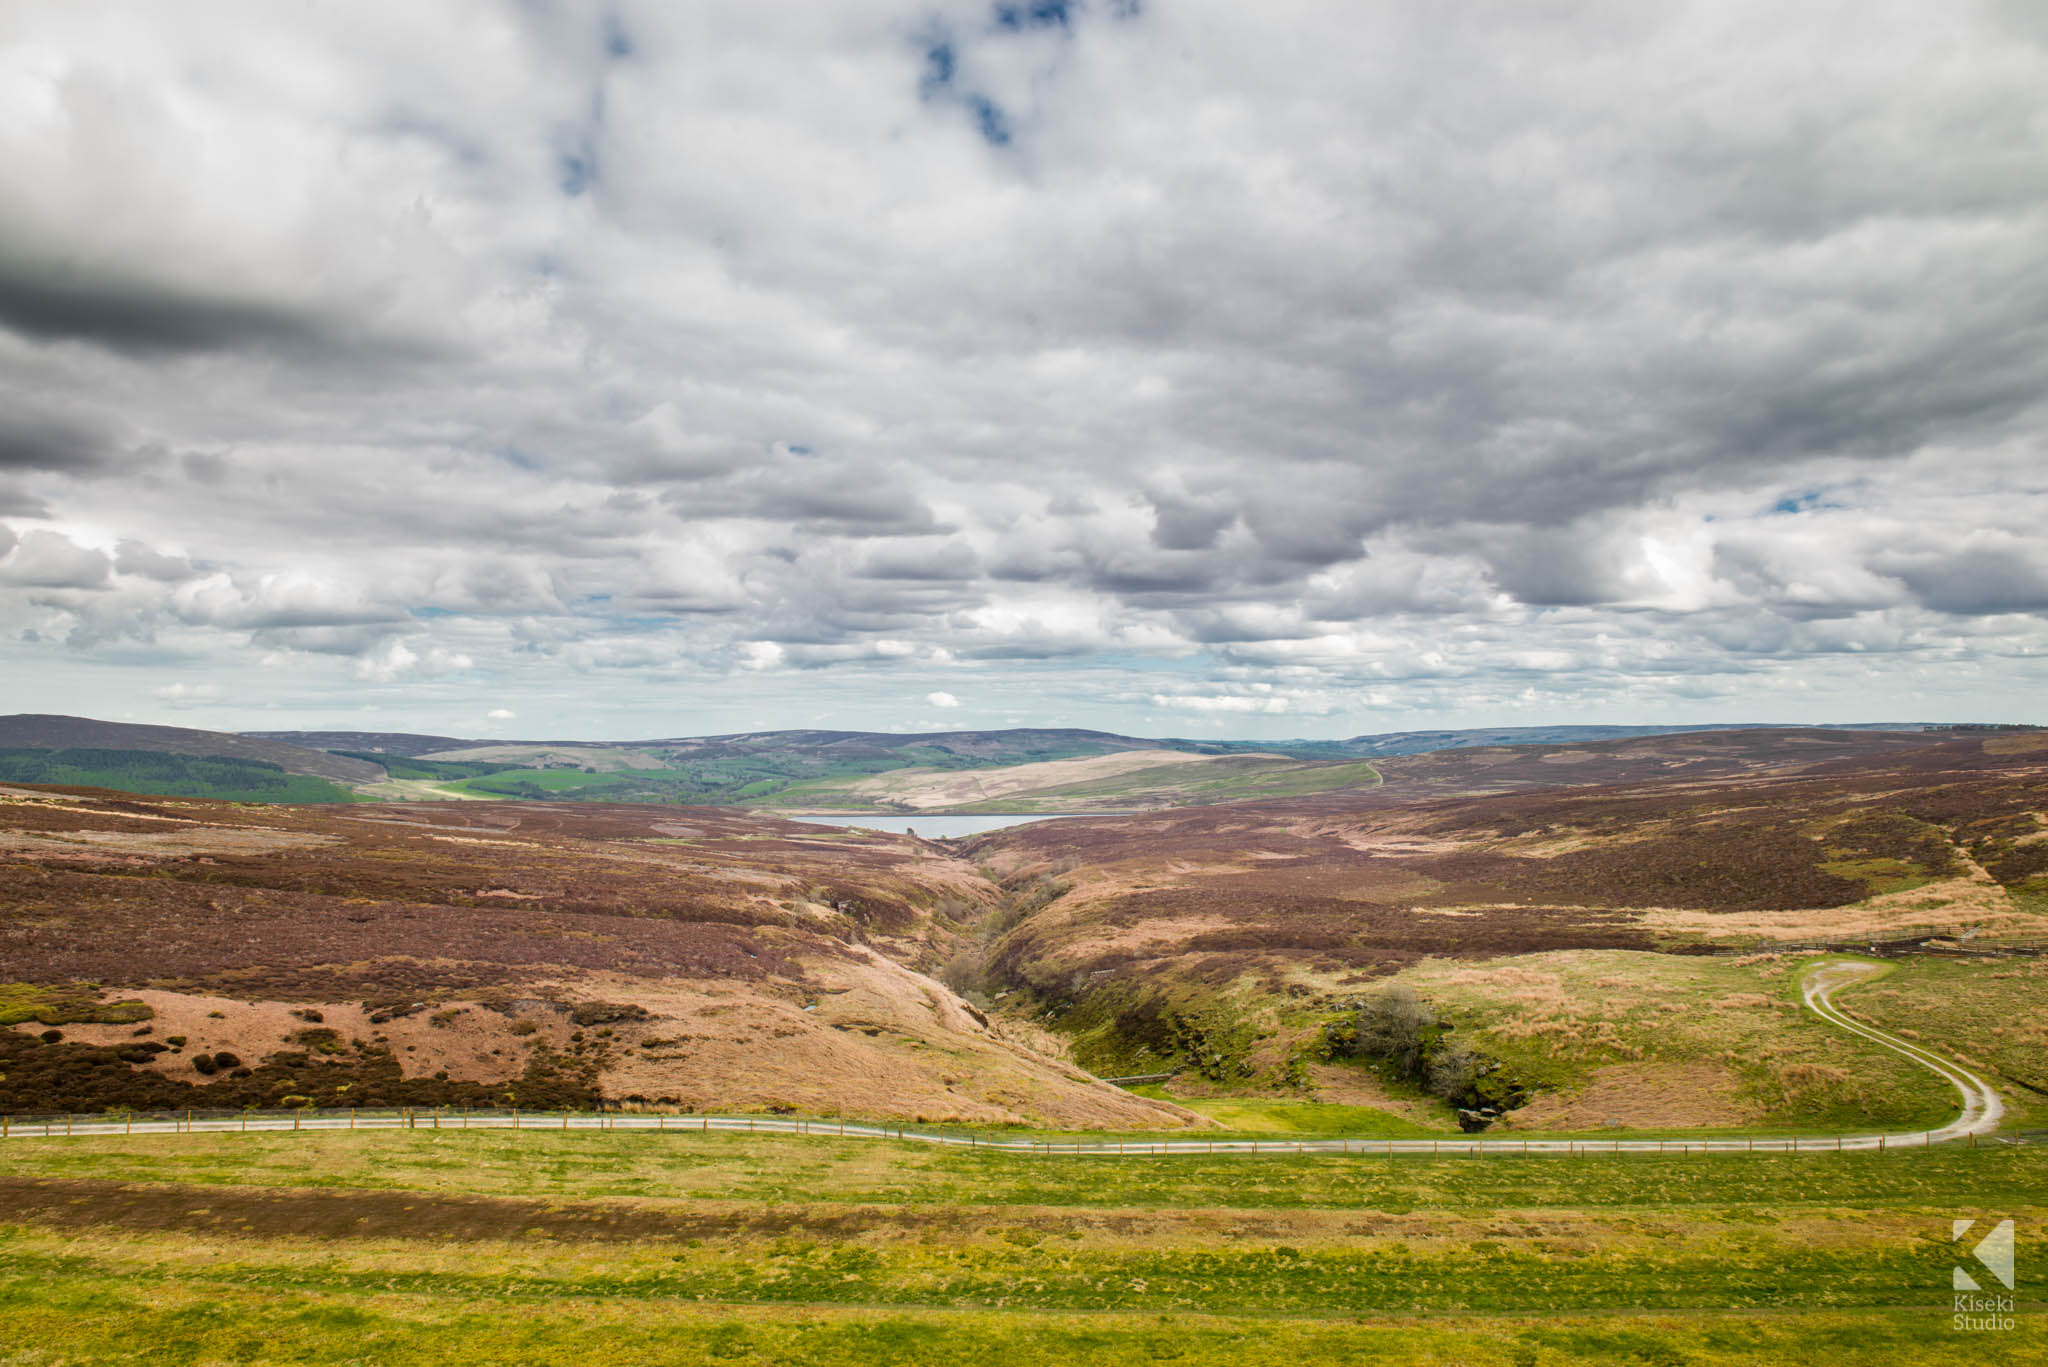 The View from Upper Barden Reservoir